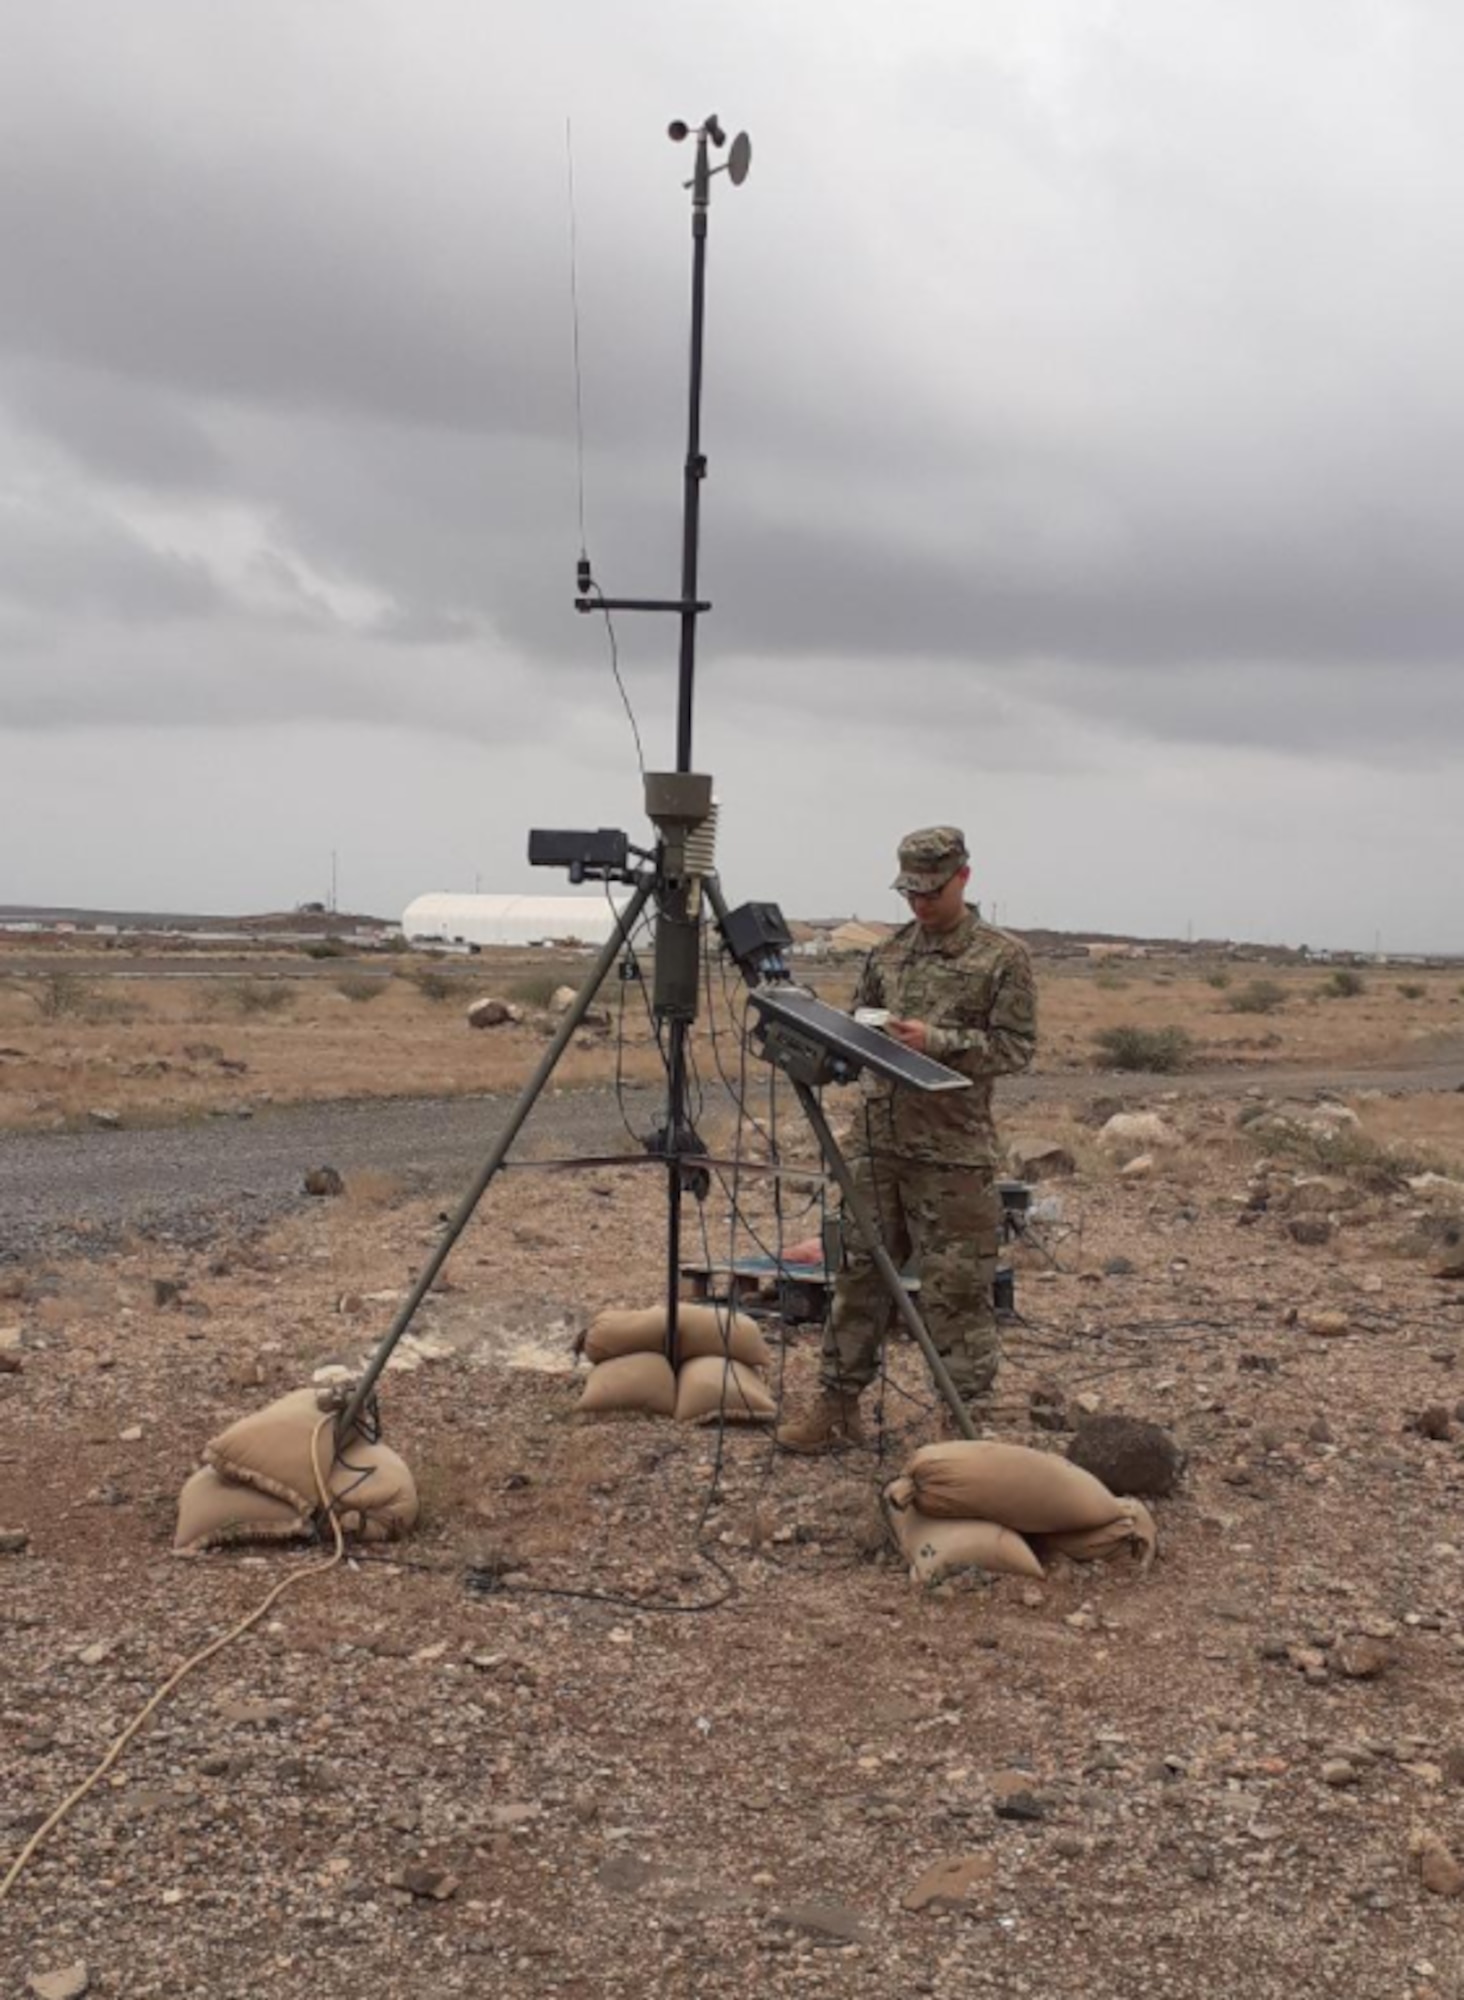 U.S. Air Force Senior Airman Sergio Porto-Duarte, 776th Expeditionary Air Base Squadron weather forecaster, performs maintenance on the Tactical Meteorological Observing System at Camp Lemonnier, Djibouti, Feb. 24, 2021.